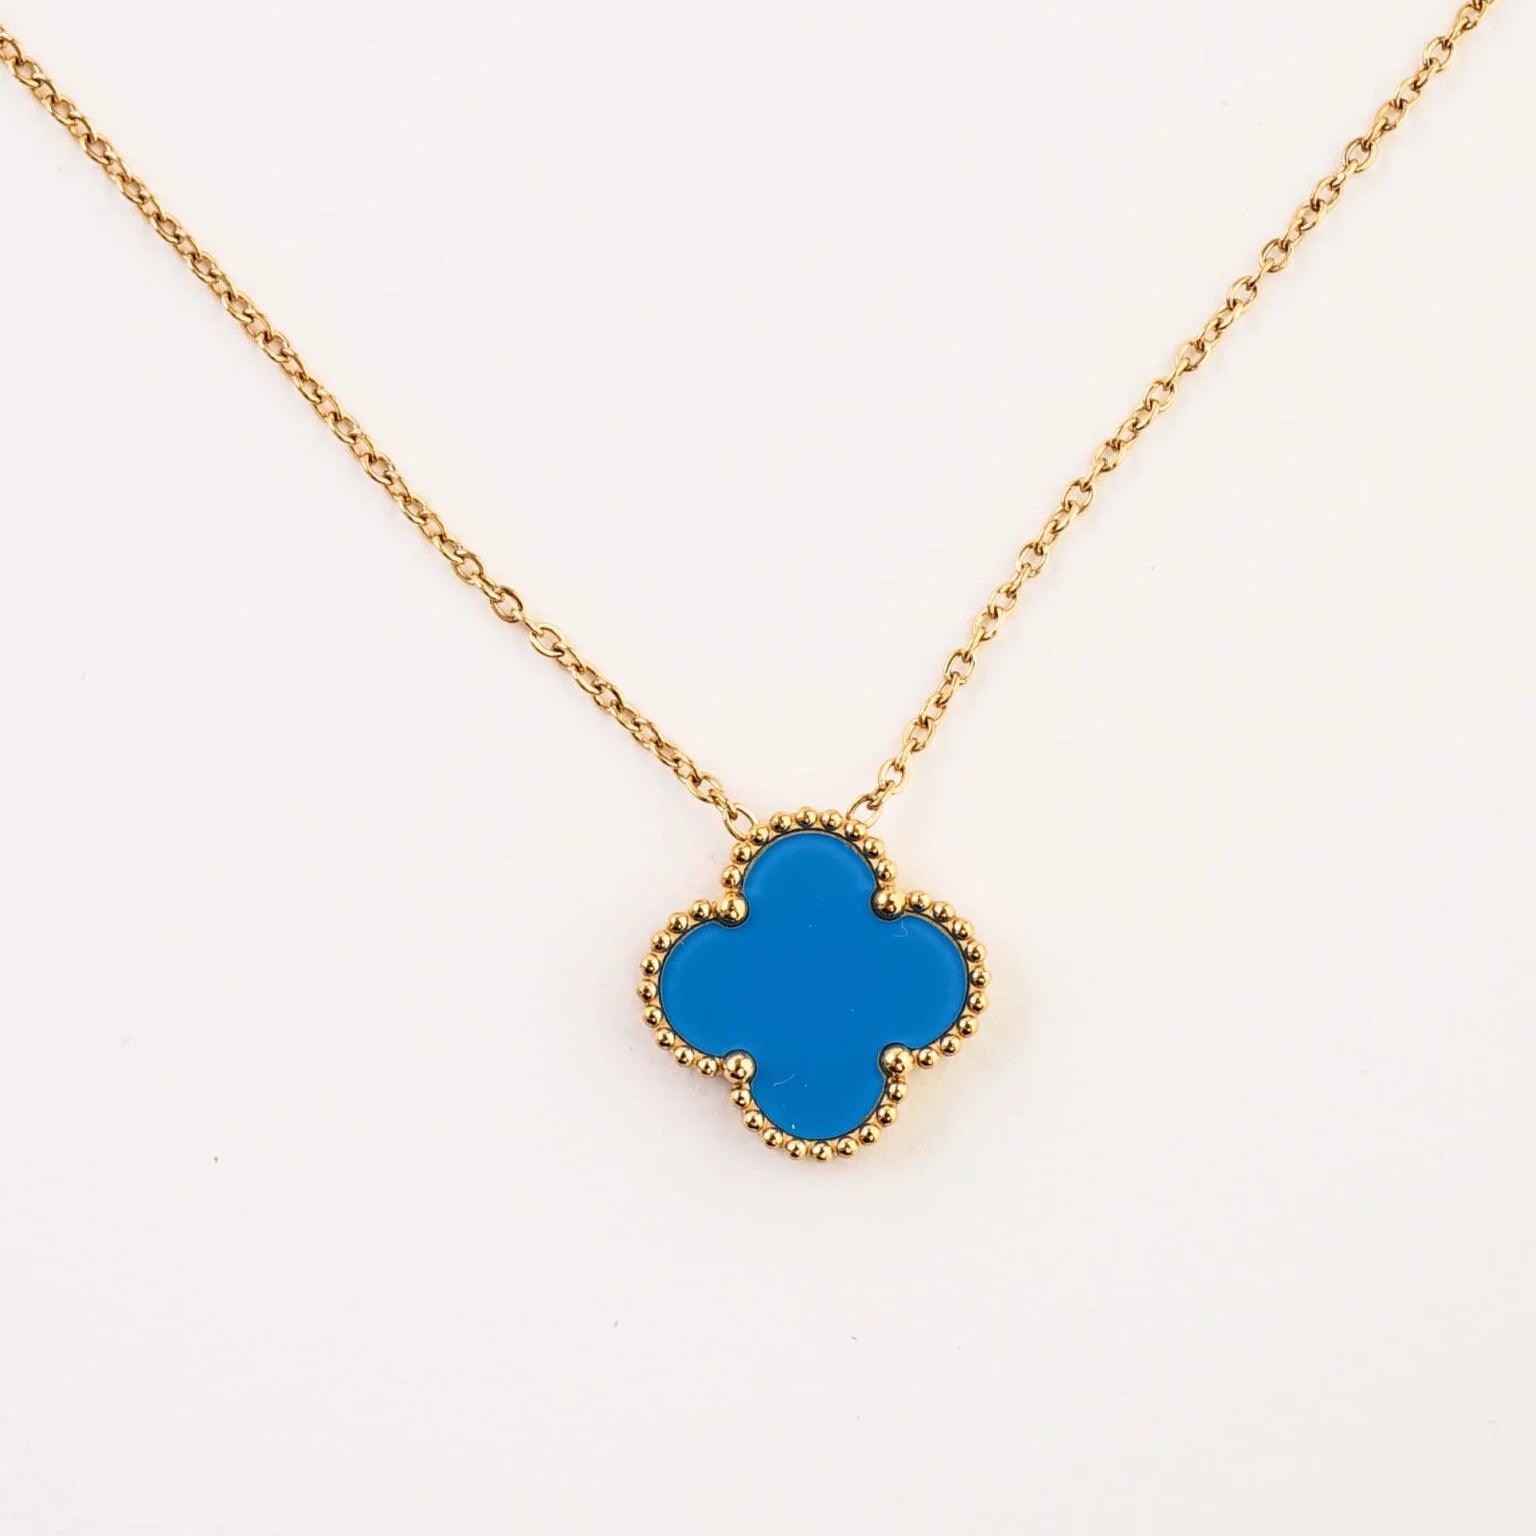 BLUE AND GOLD FOUR LEAF CLOVER NECKLACE - Lynott Jewellery